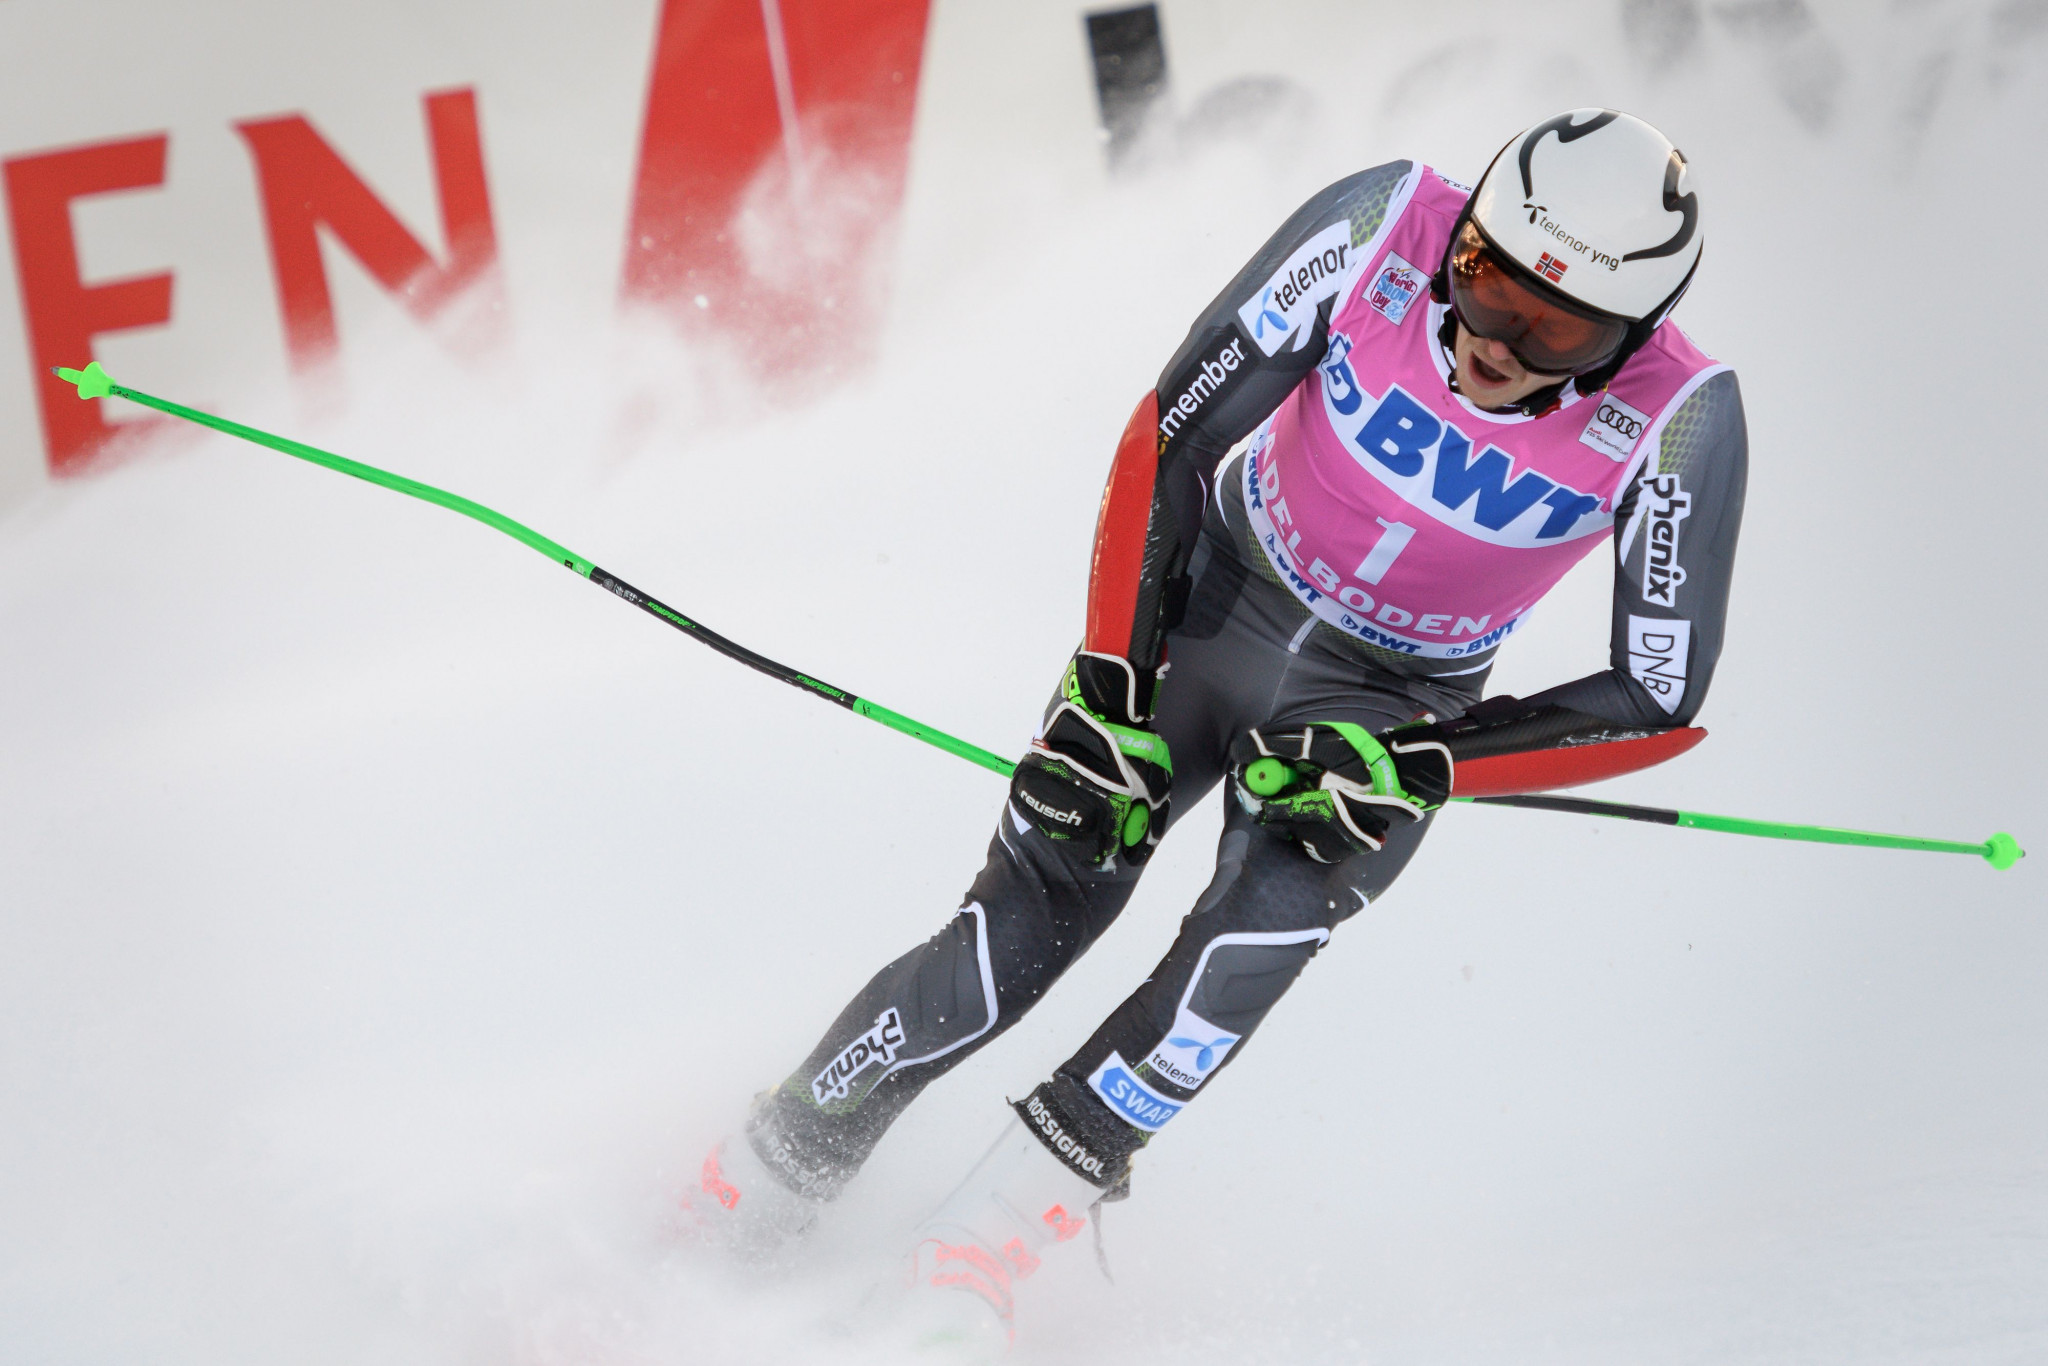 Norway's Henrik Kristoffersen led after the first run but ended second overall ©Getty Images